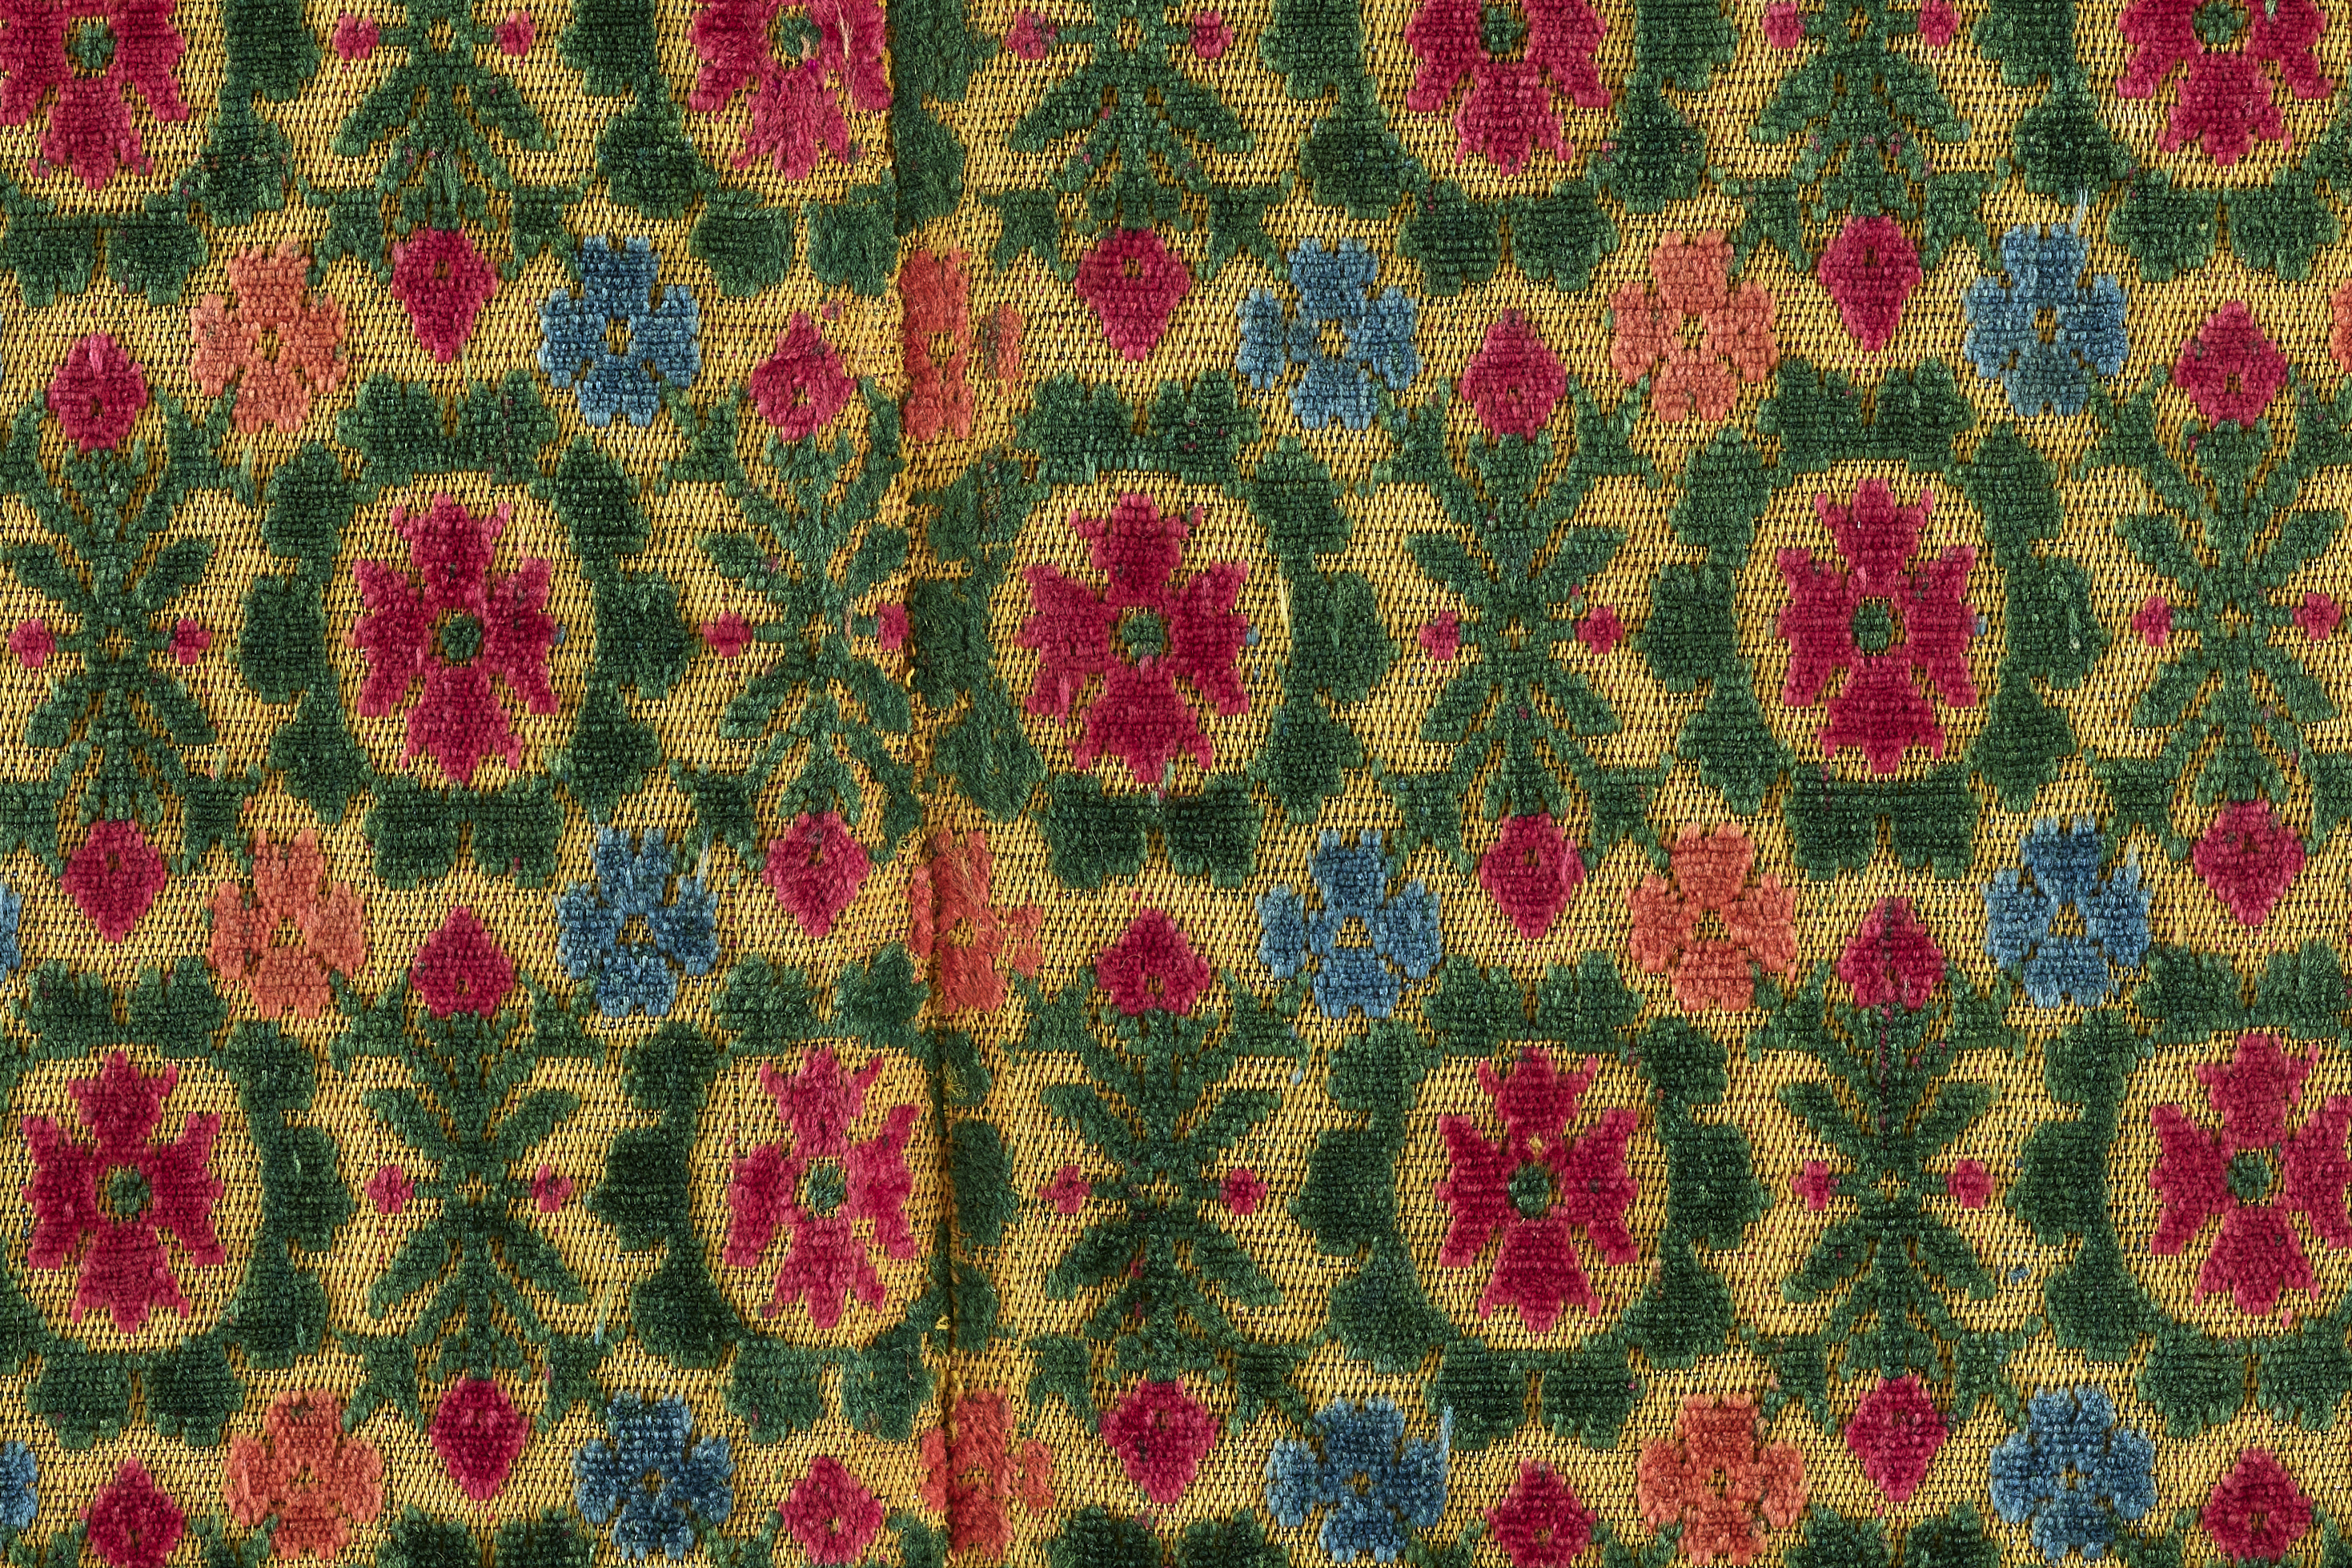 A close-up fragment of velvet from the digitized Textile Museum Collection.